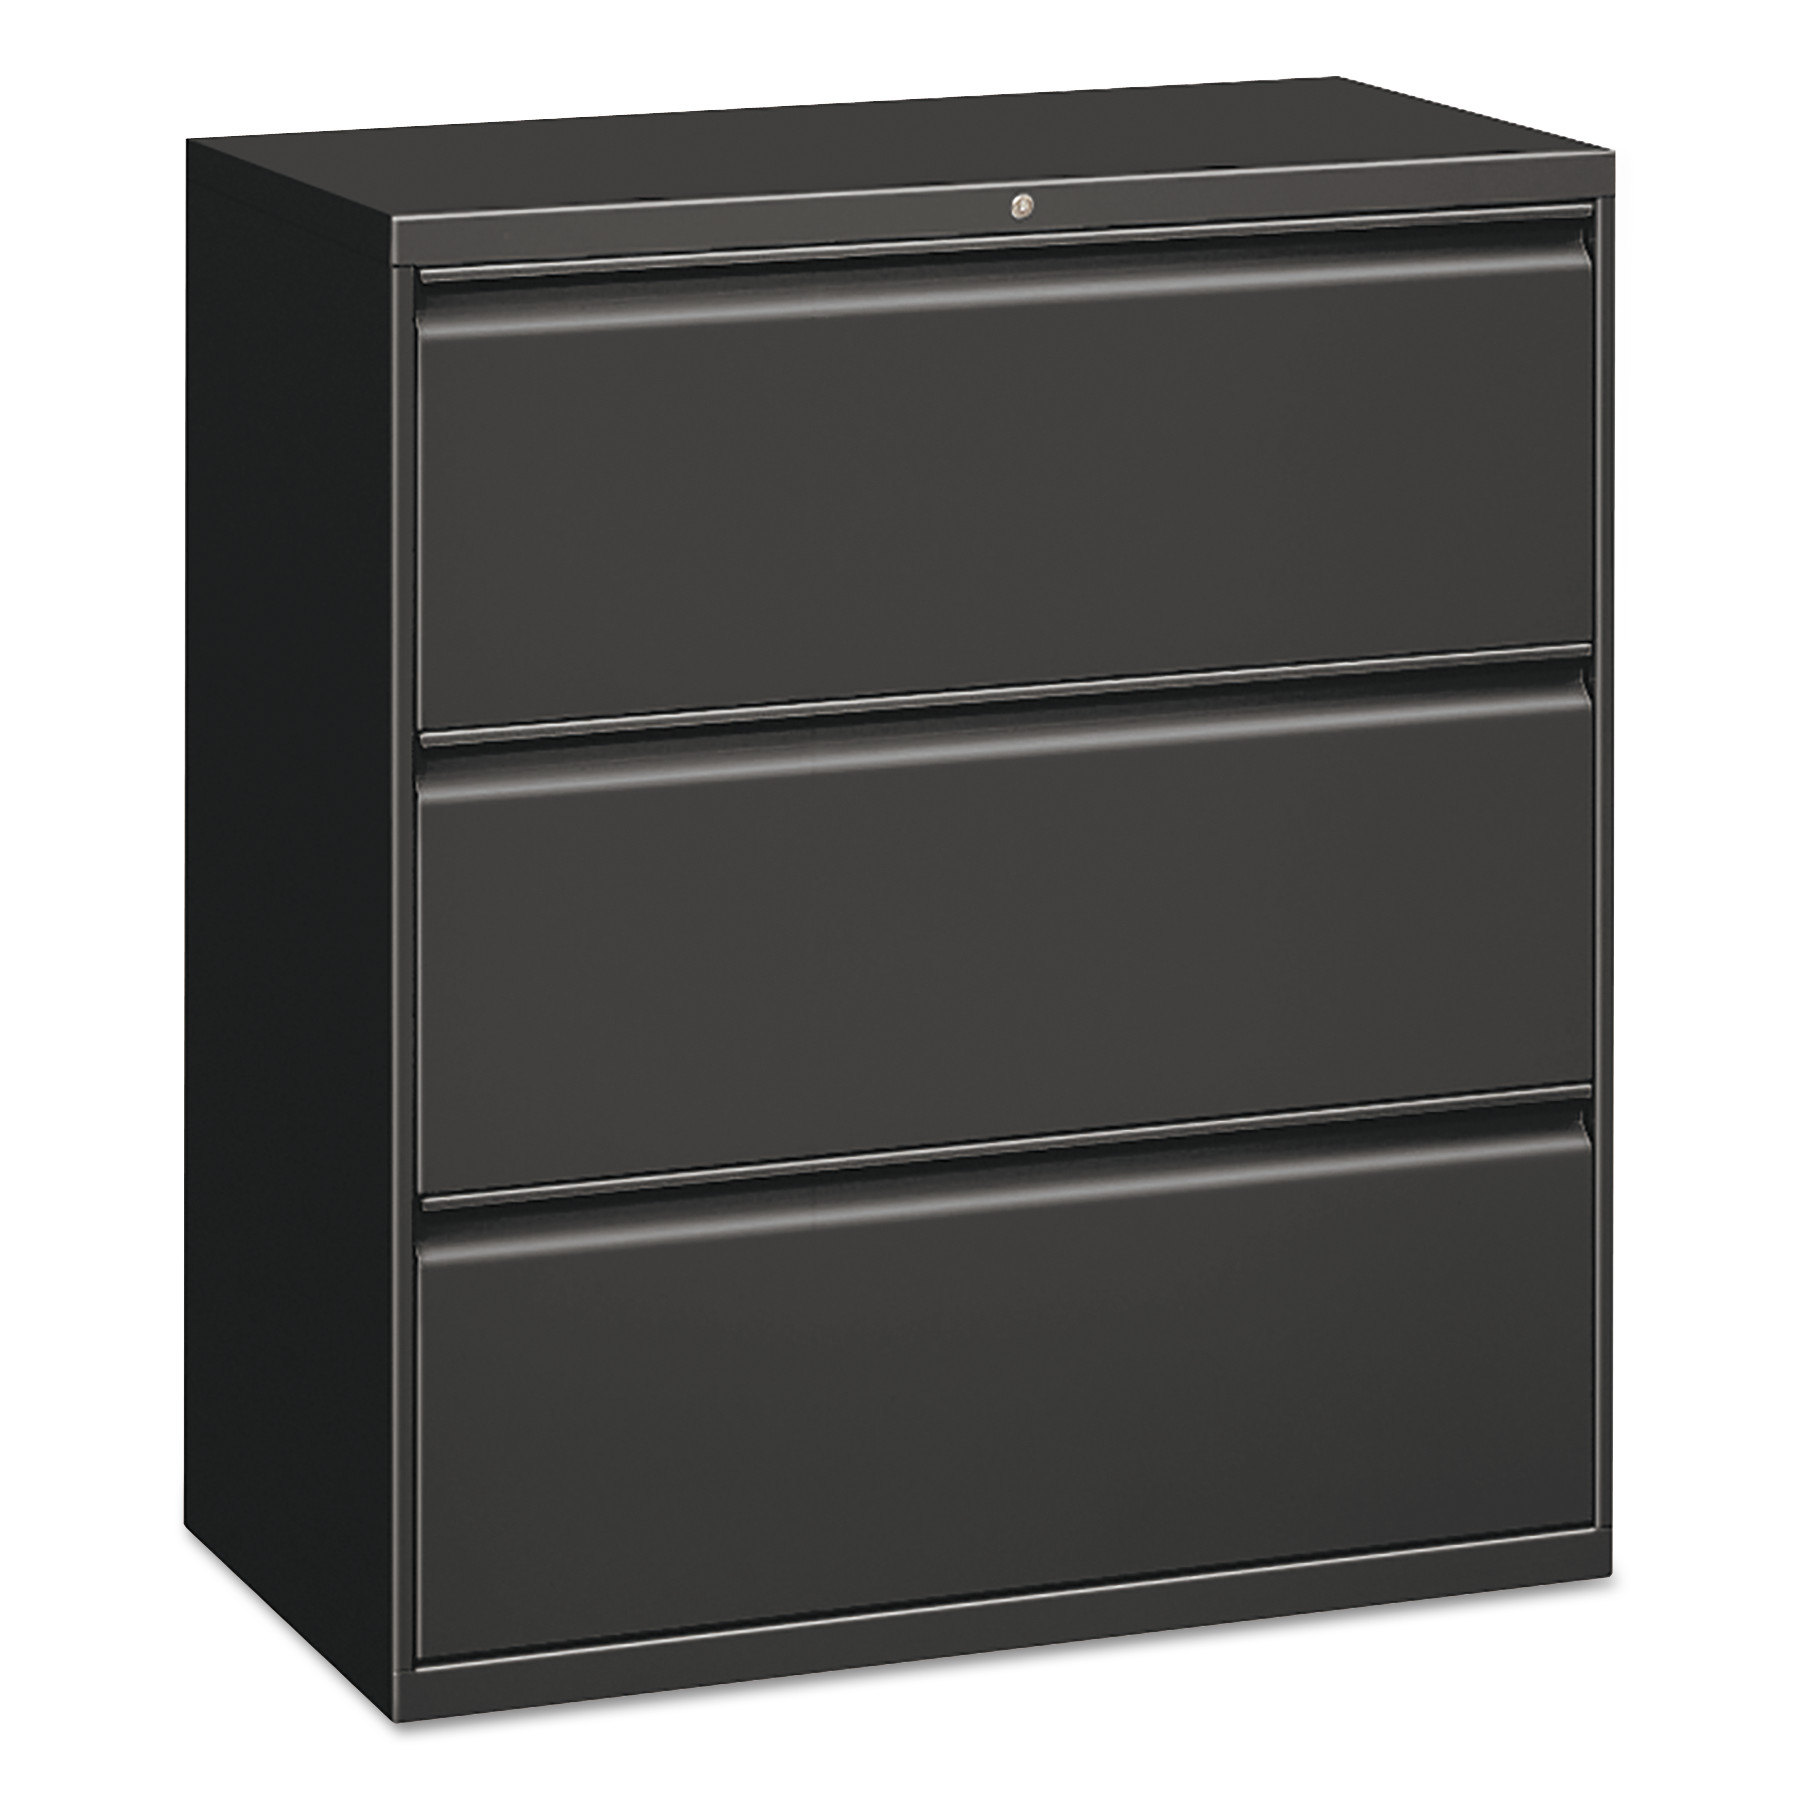 Alera ALELF3041CC Three-Drawer Lateral File Cabinet - Charcoal - image 2 of 2